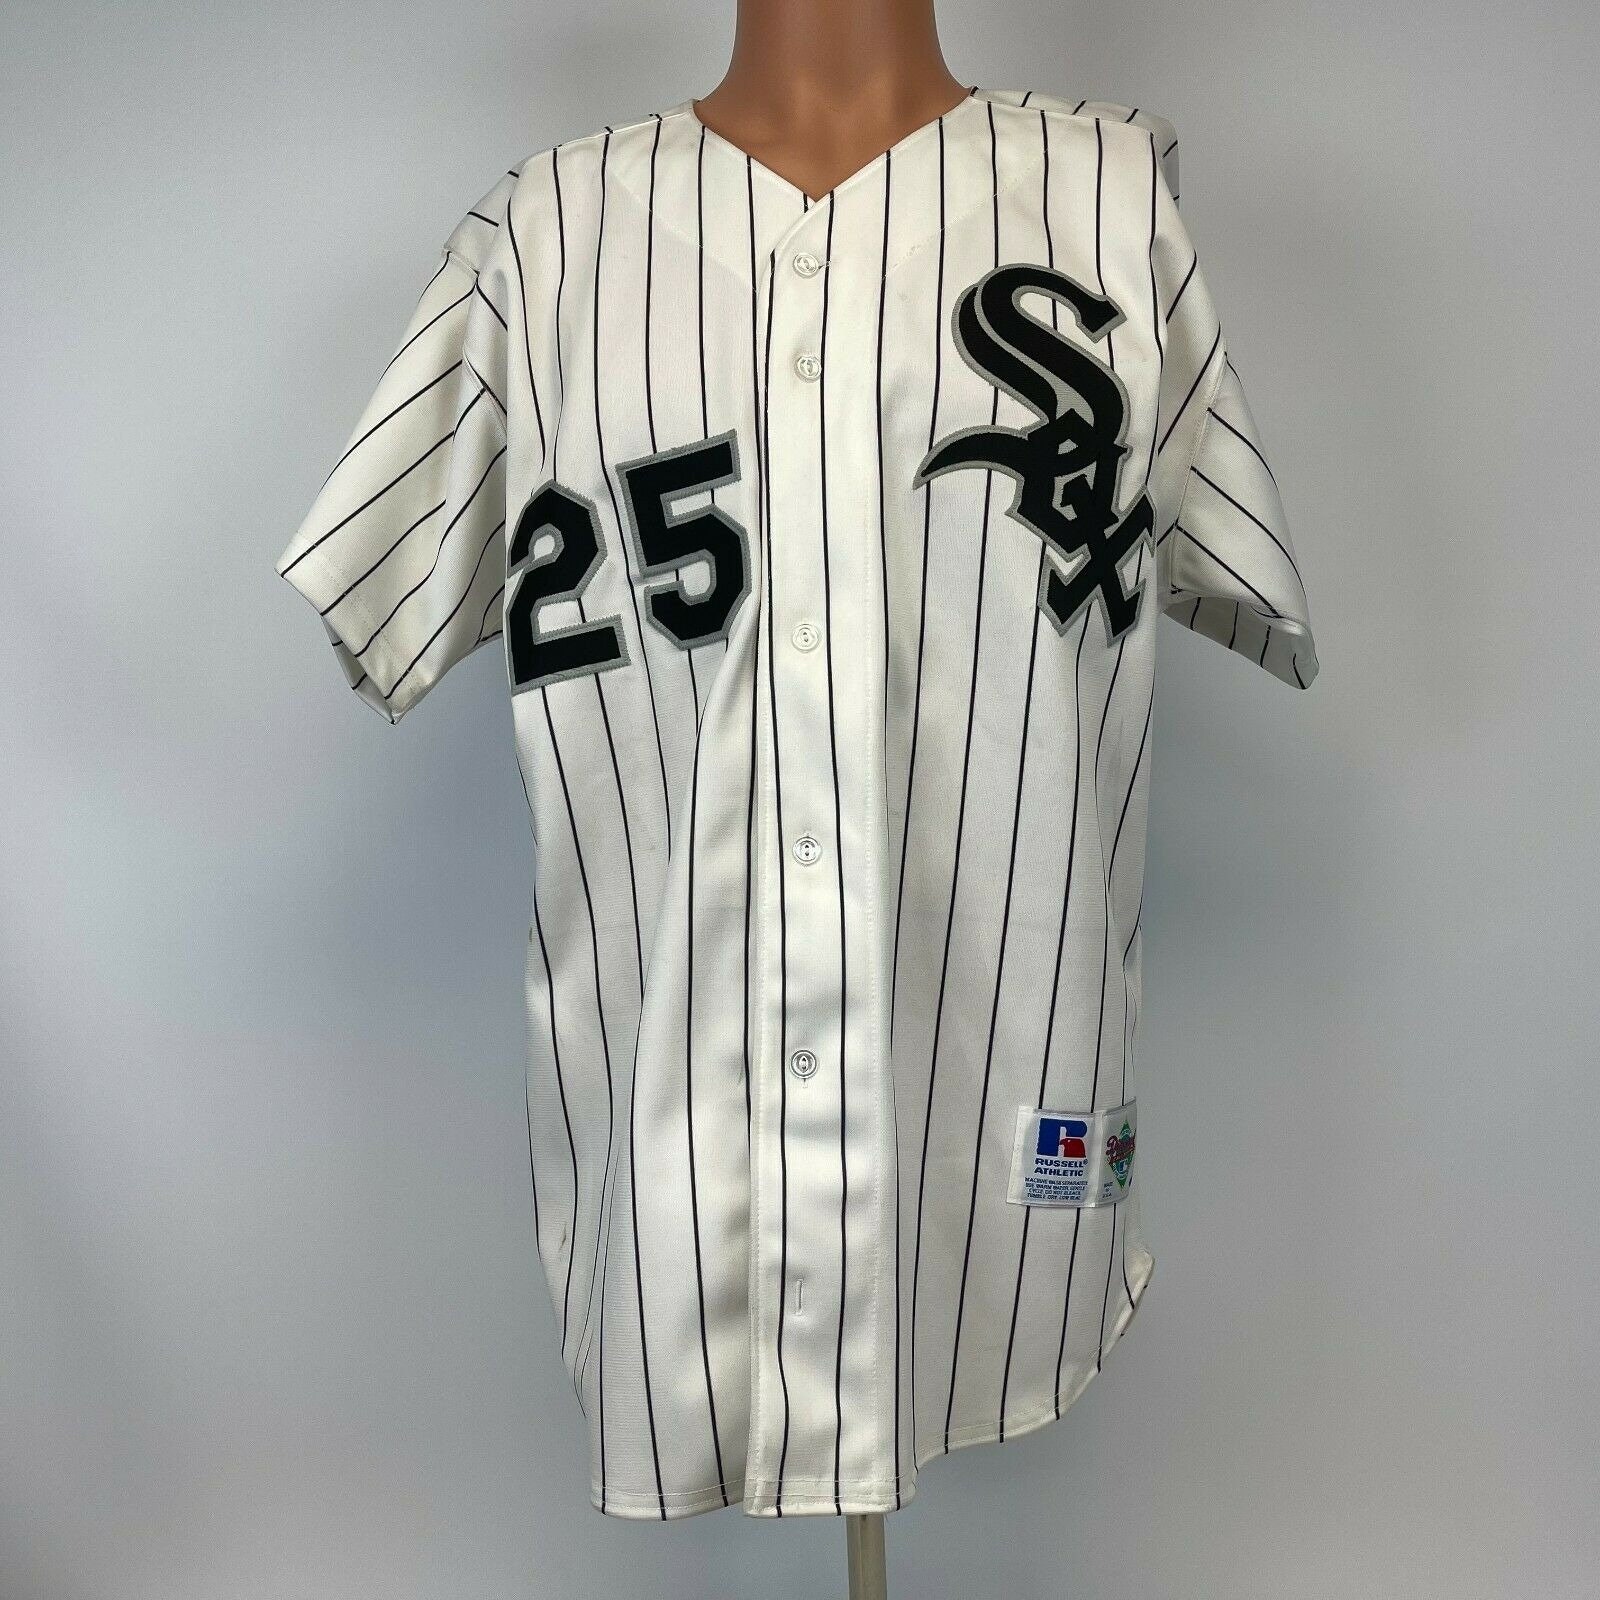 BeantownFinds Russell Authentic Jim Abbott Chicago White Sox Jersey Vtg 90s MLB Diamond 44